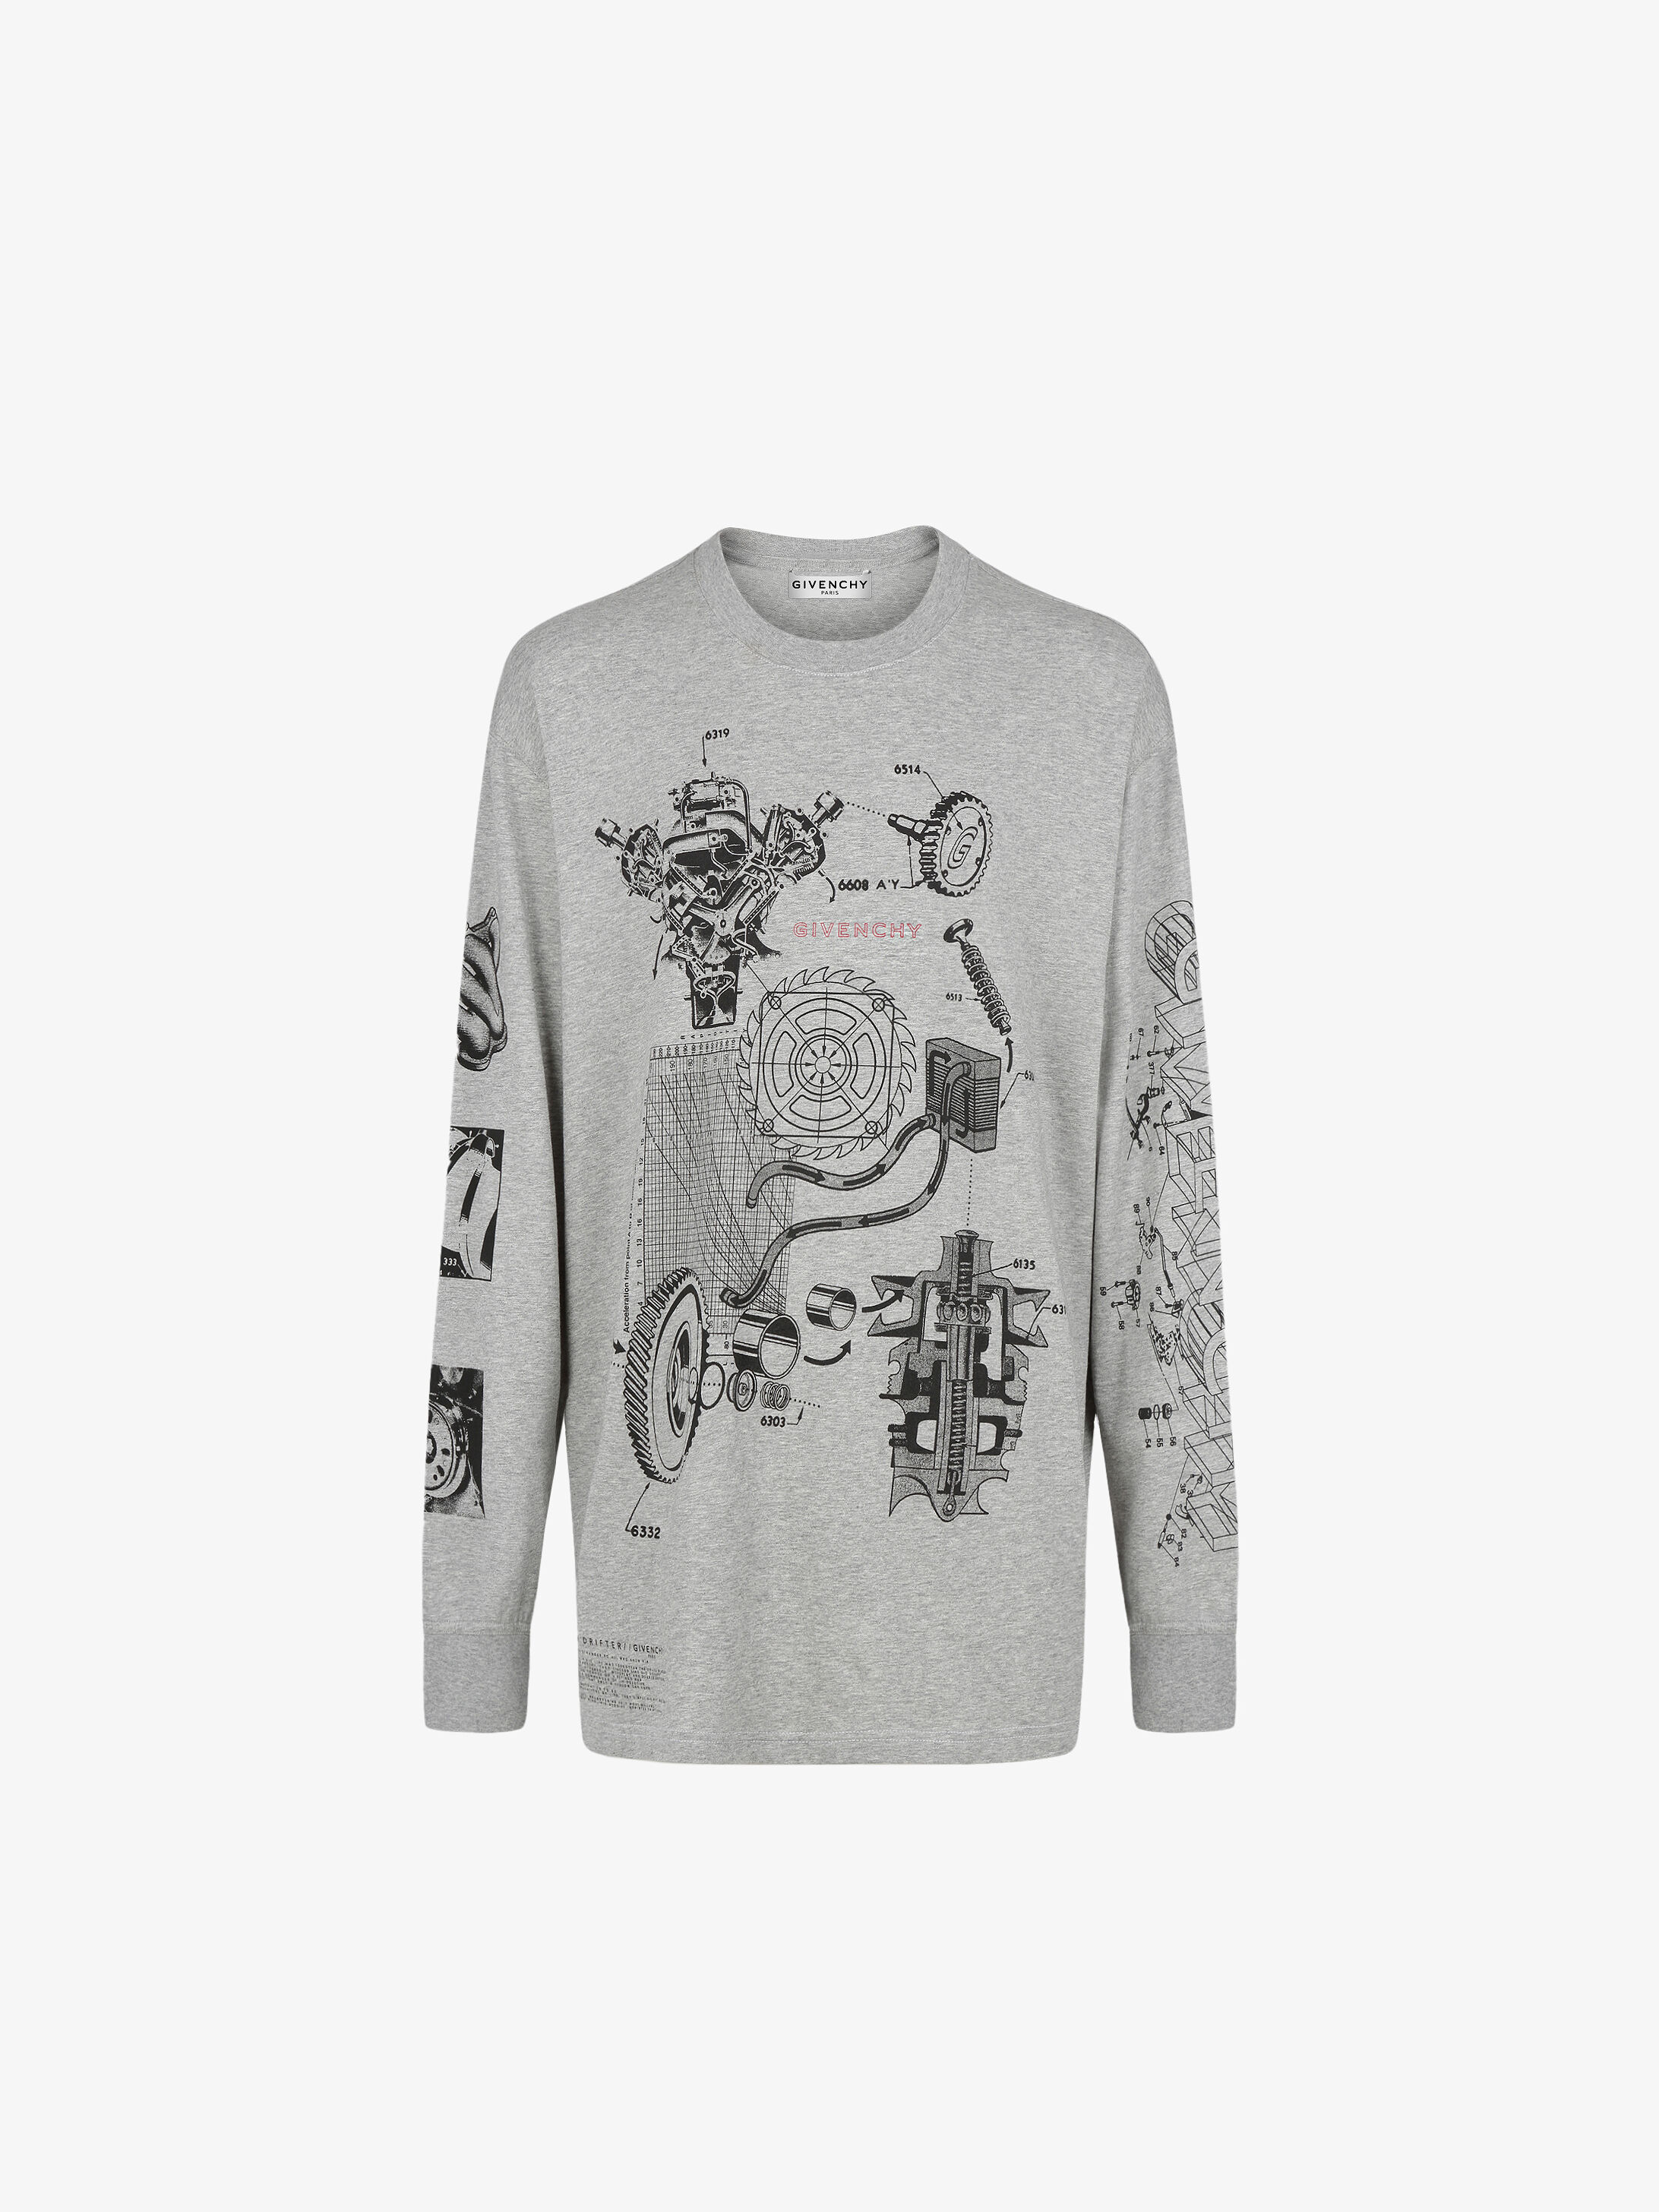 givenchy t shirt online india